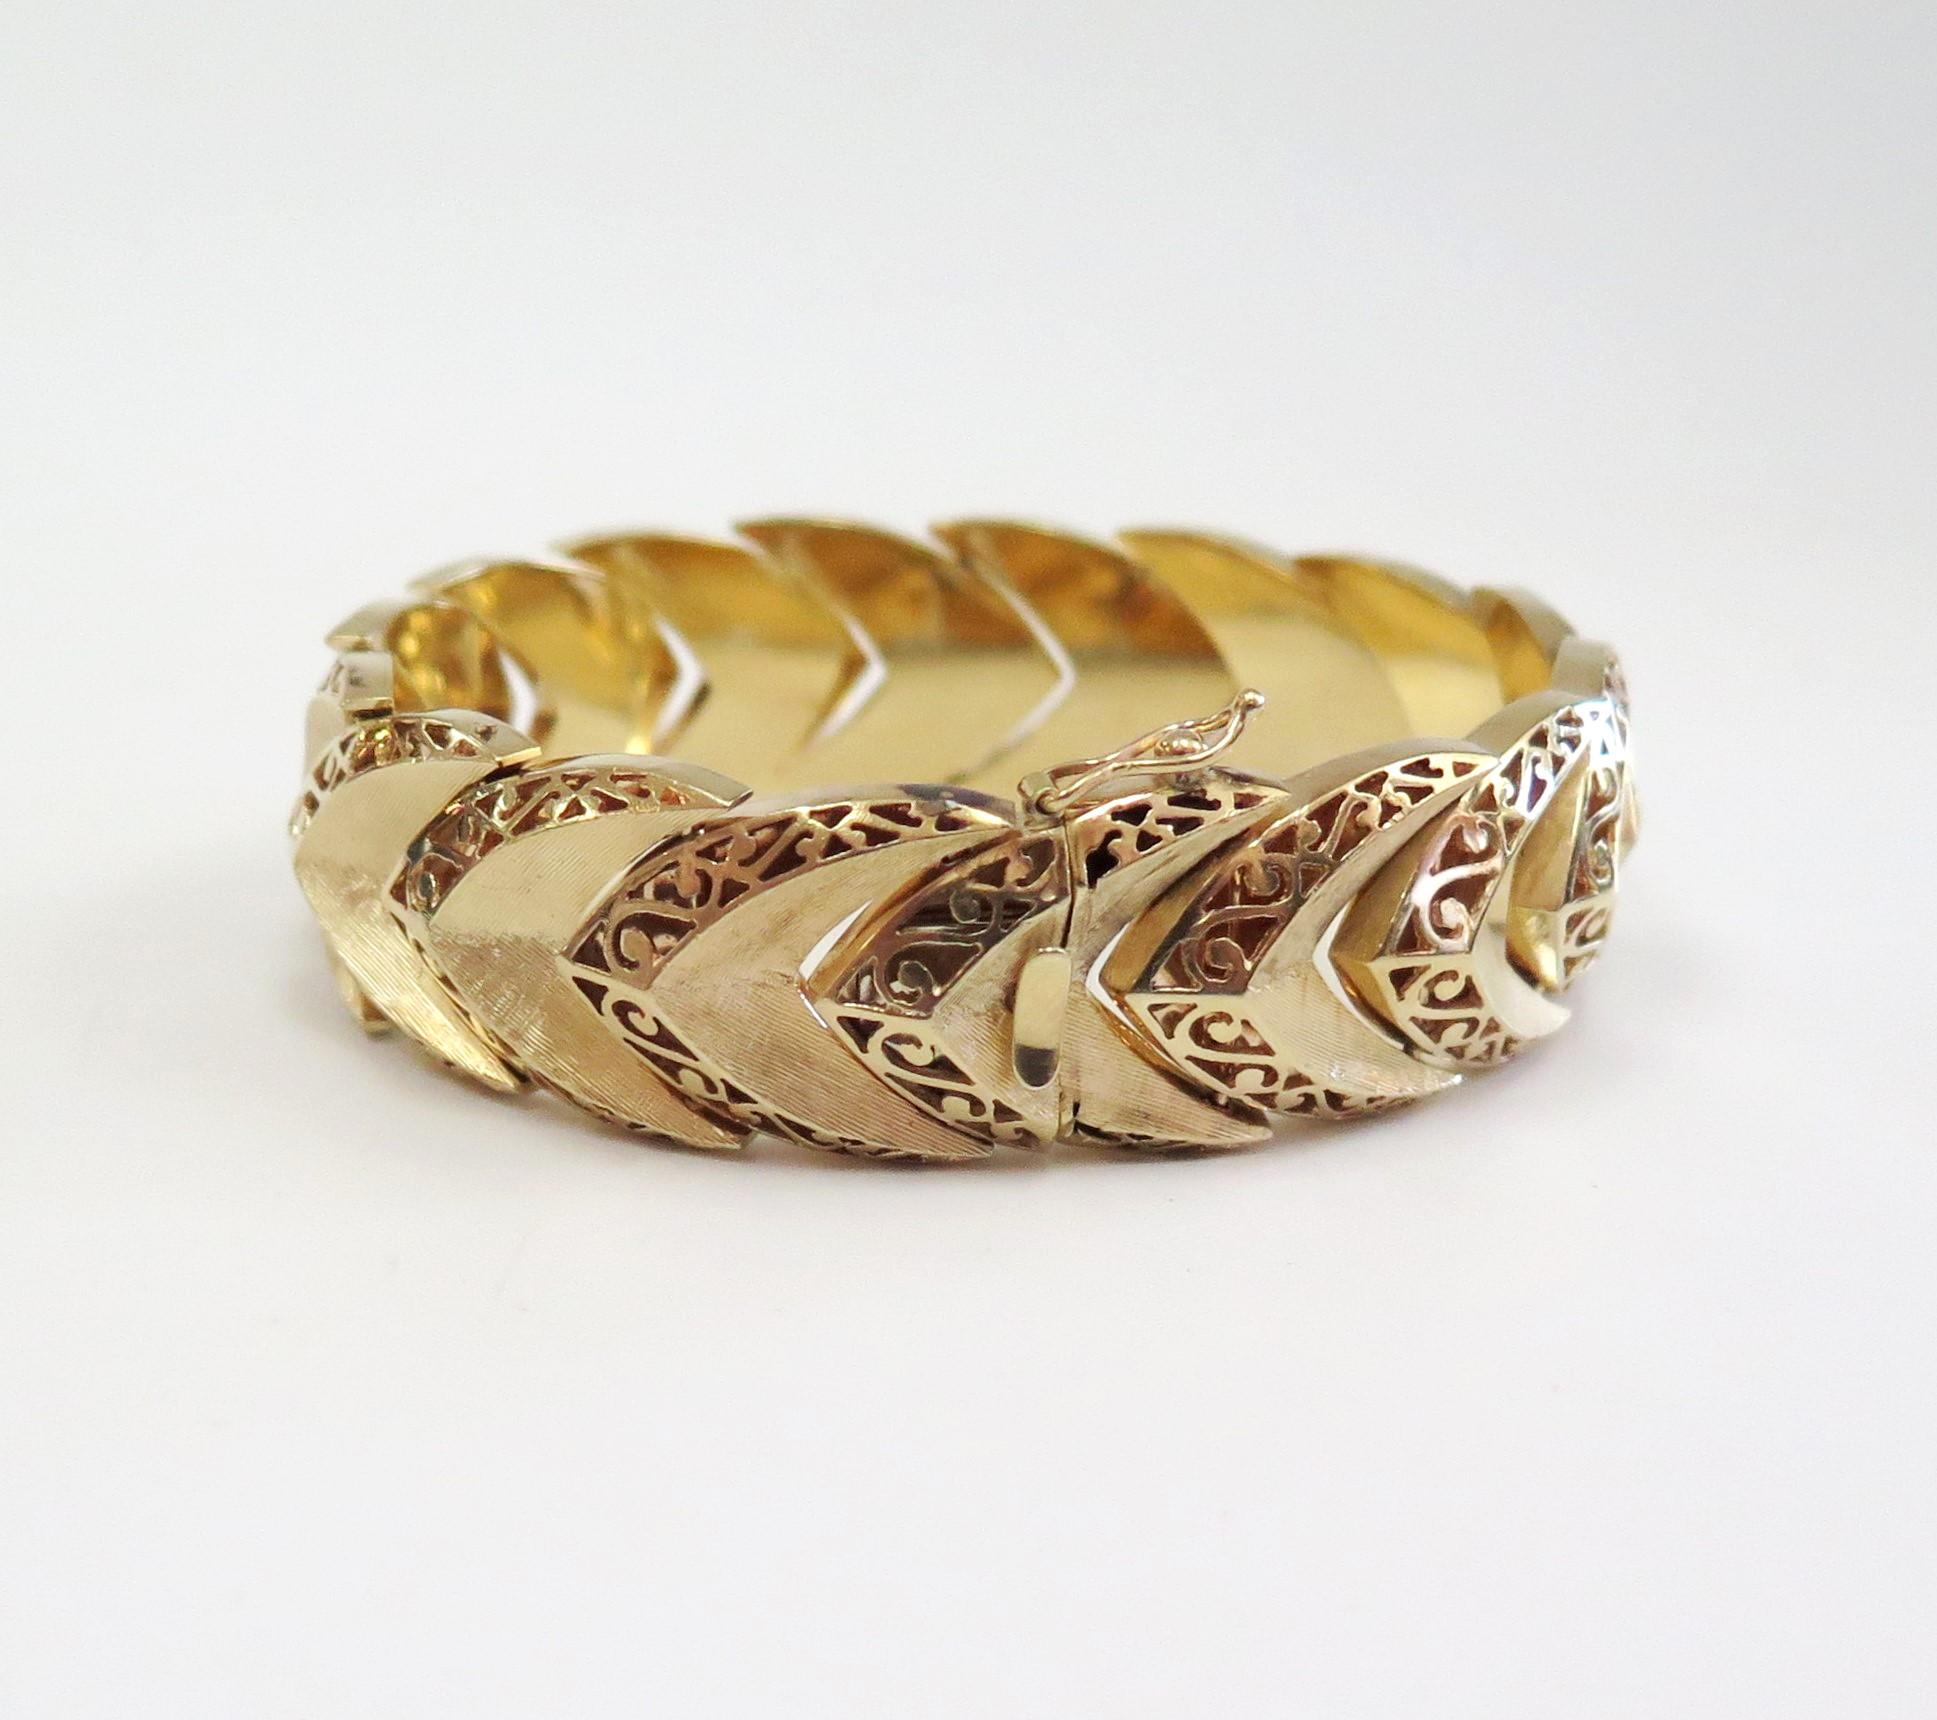 Wide Bracelet with Chevron and Scroll Design, 14 Karat Yellow Gold 9